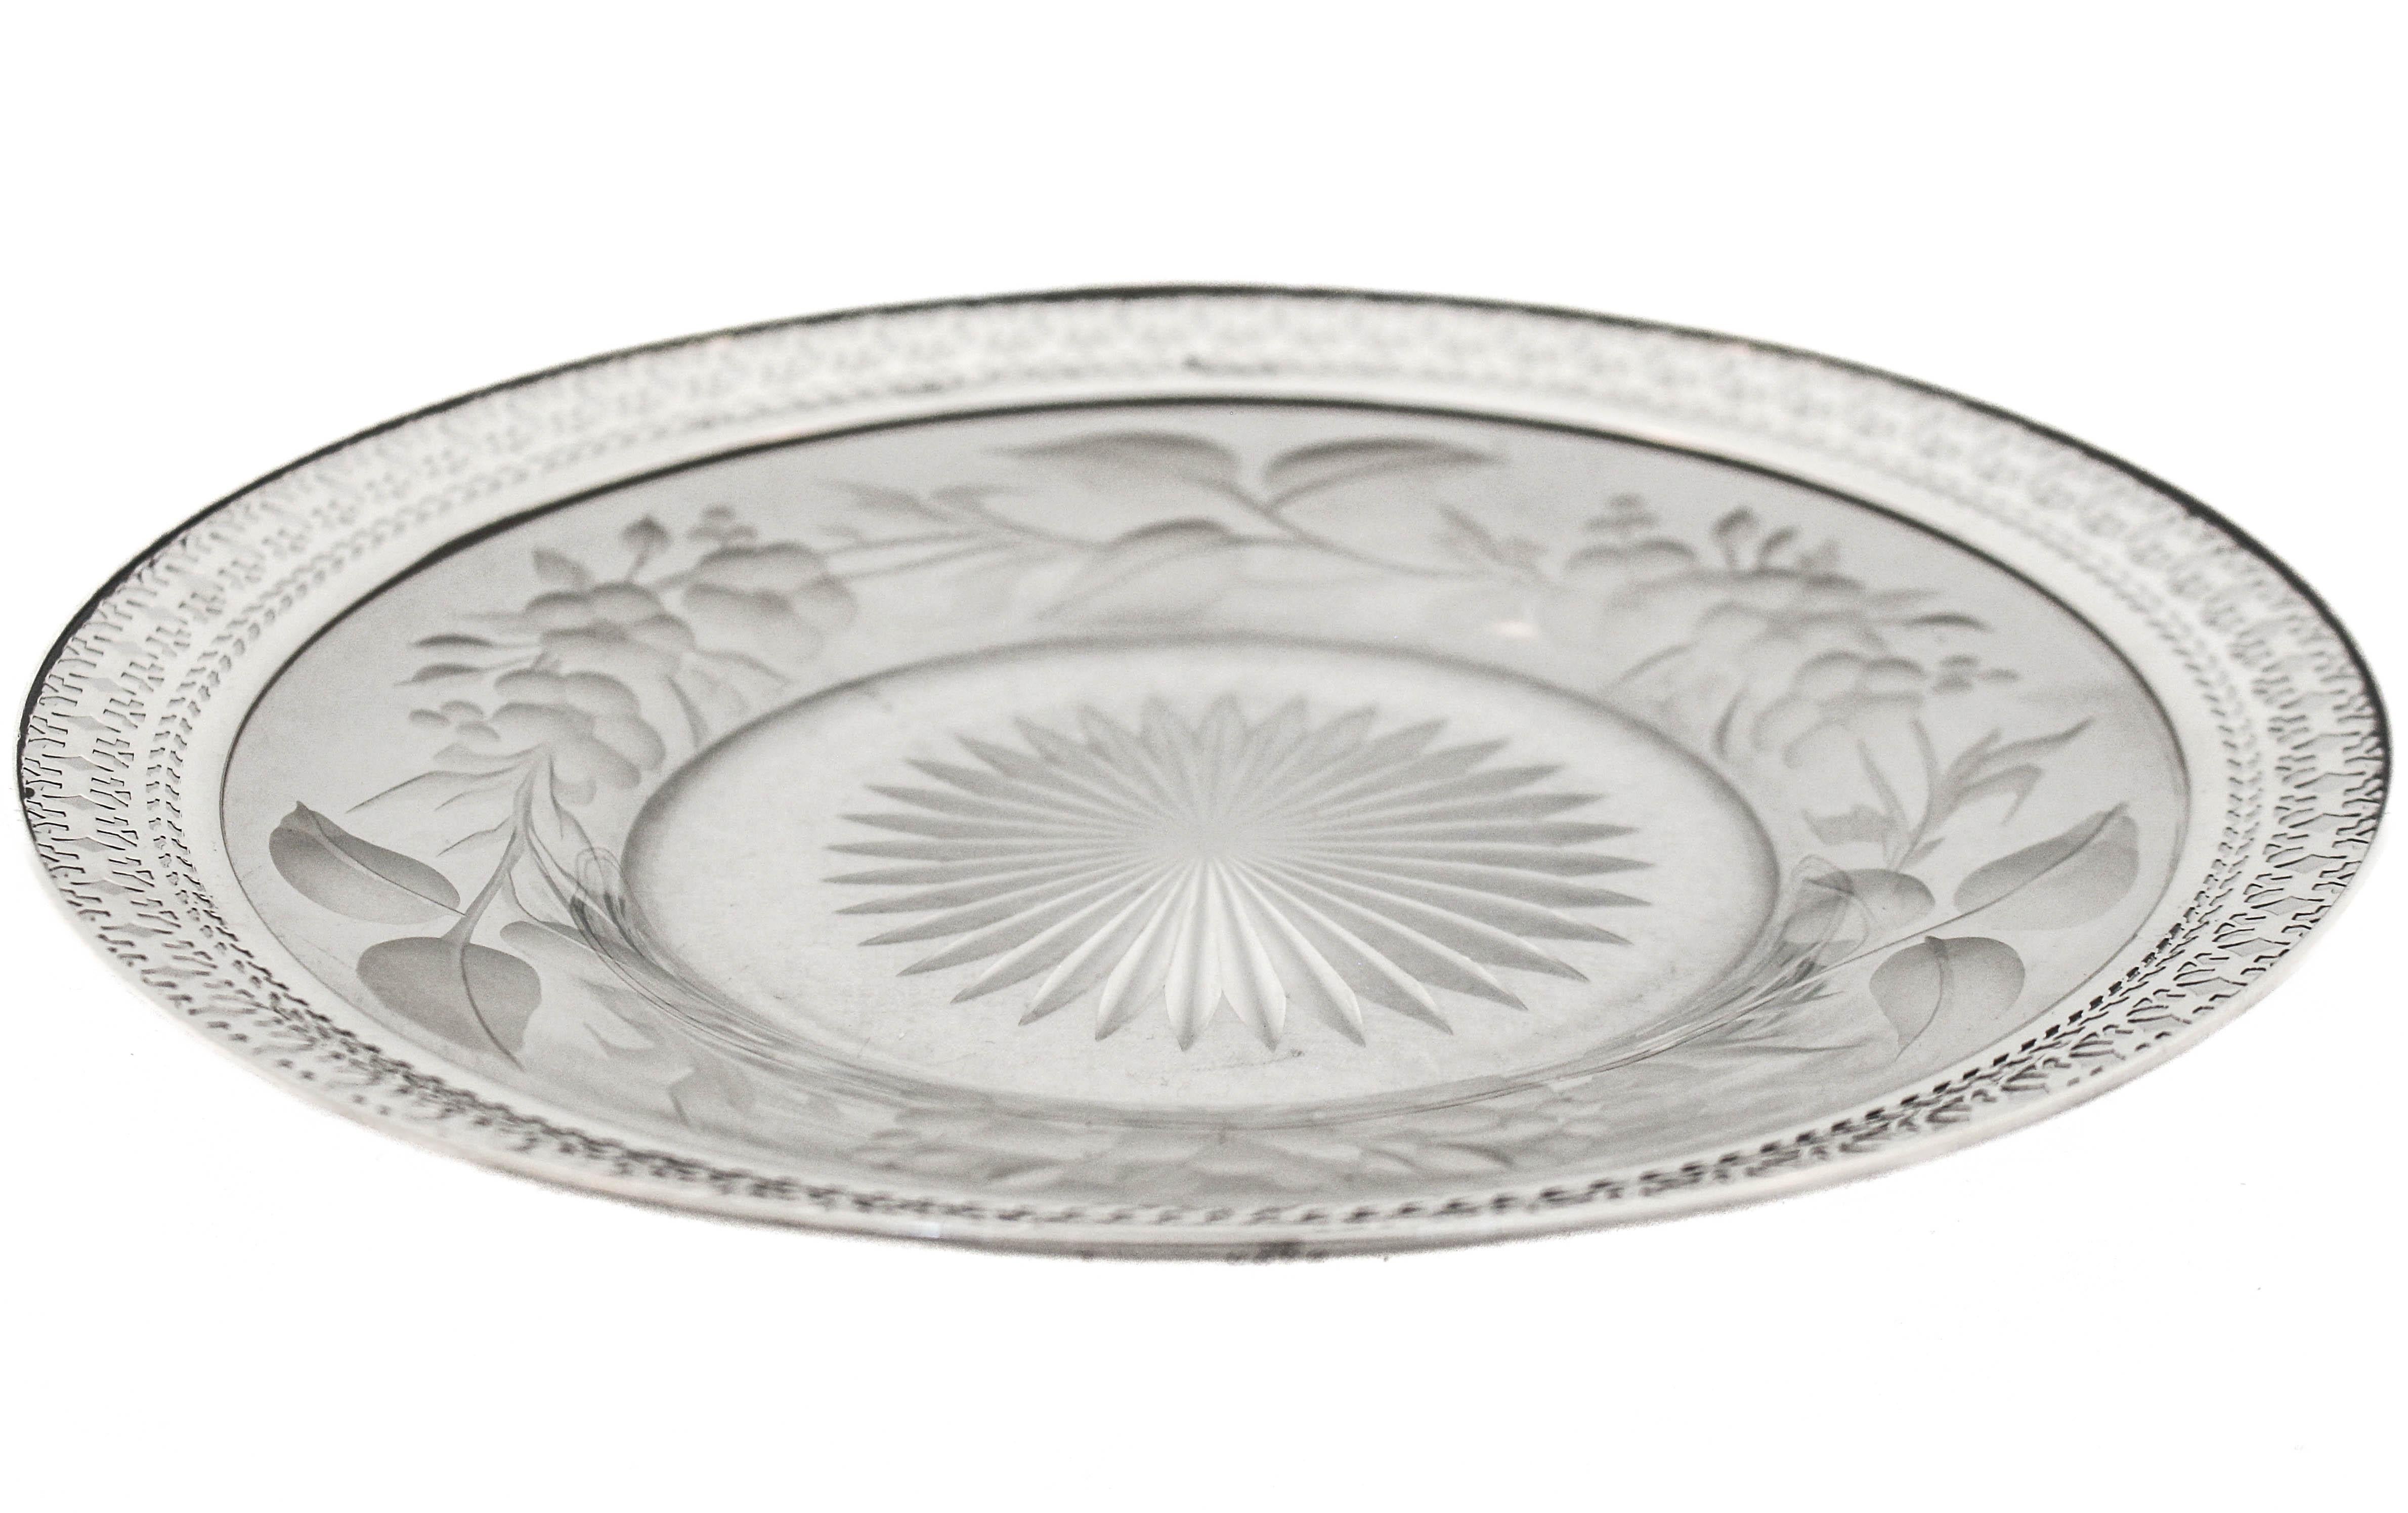 Being offered is a crystal and sterling silver dish by International Silver.  The silver rim is reticulated with an area for a monogram.  The crystal dish has a starburst in the center with an acid-etched floral design going all the way around. 